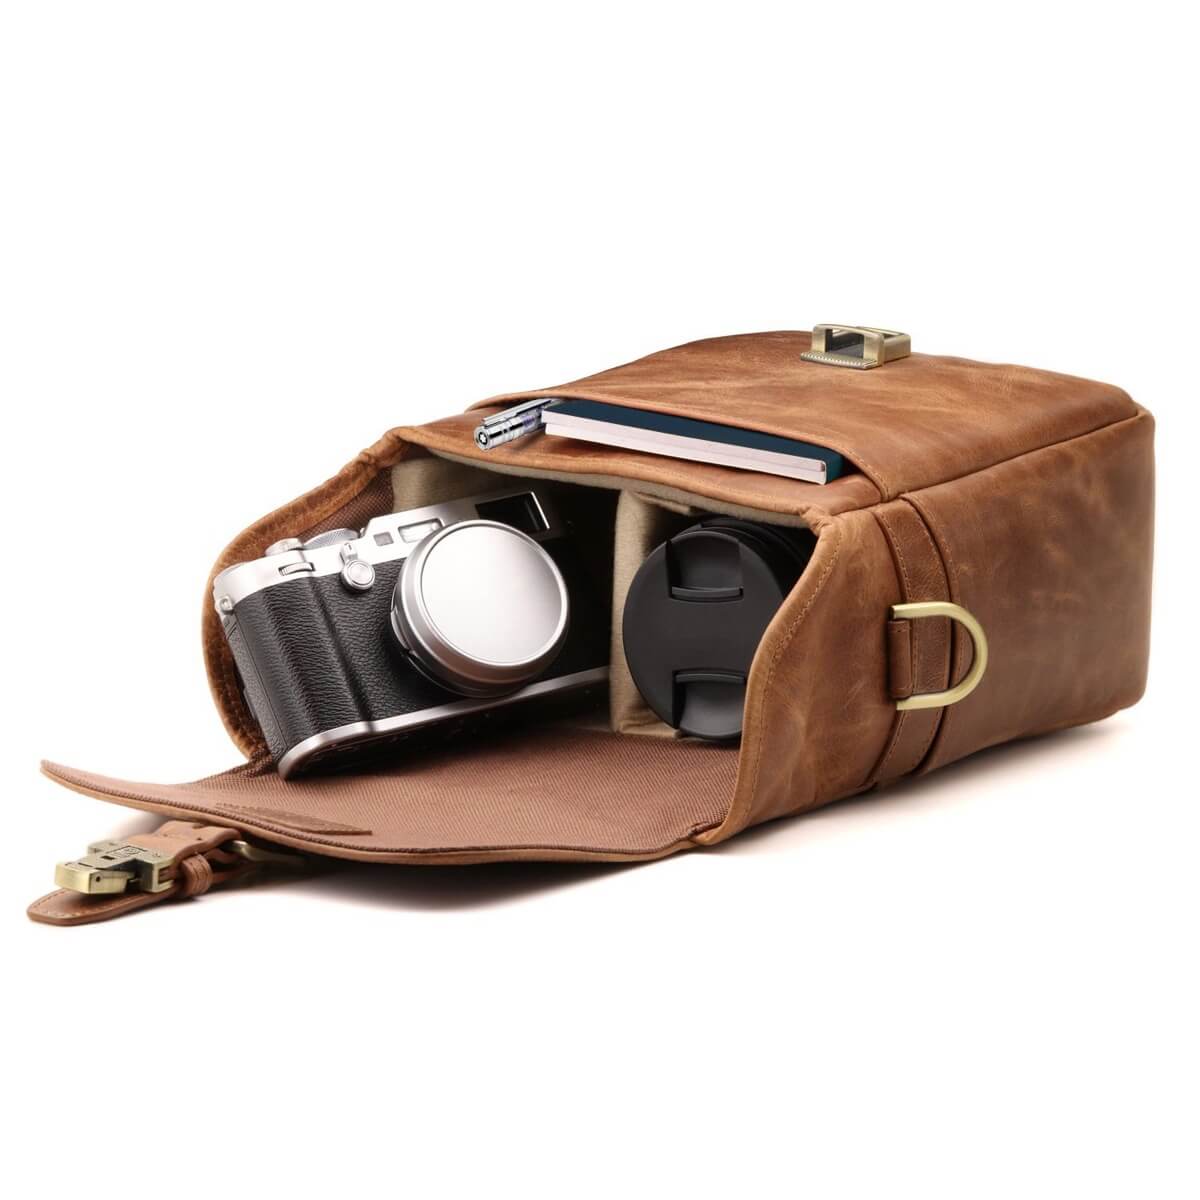 45 Great Camera Bags For Every Budget The Photo Argus